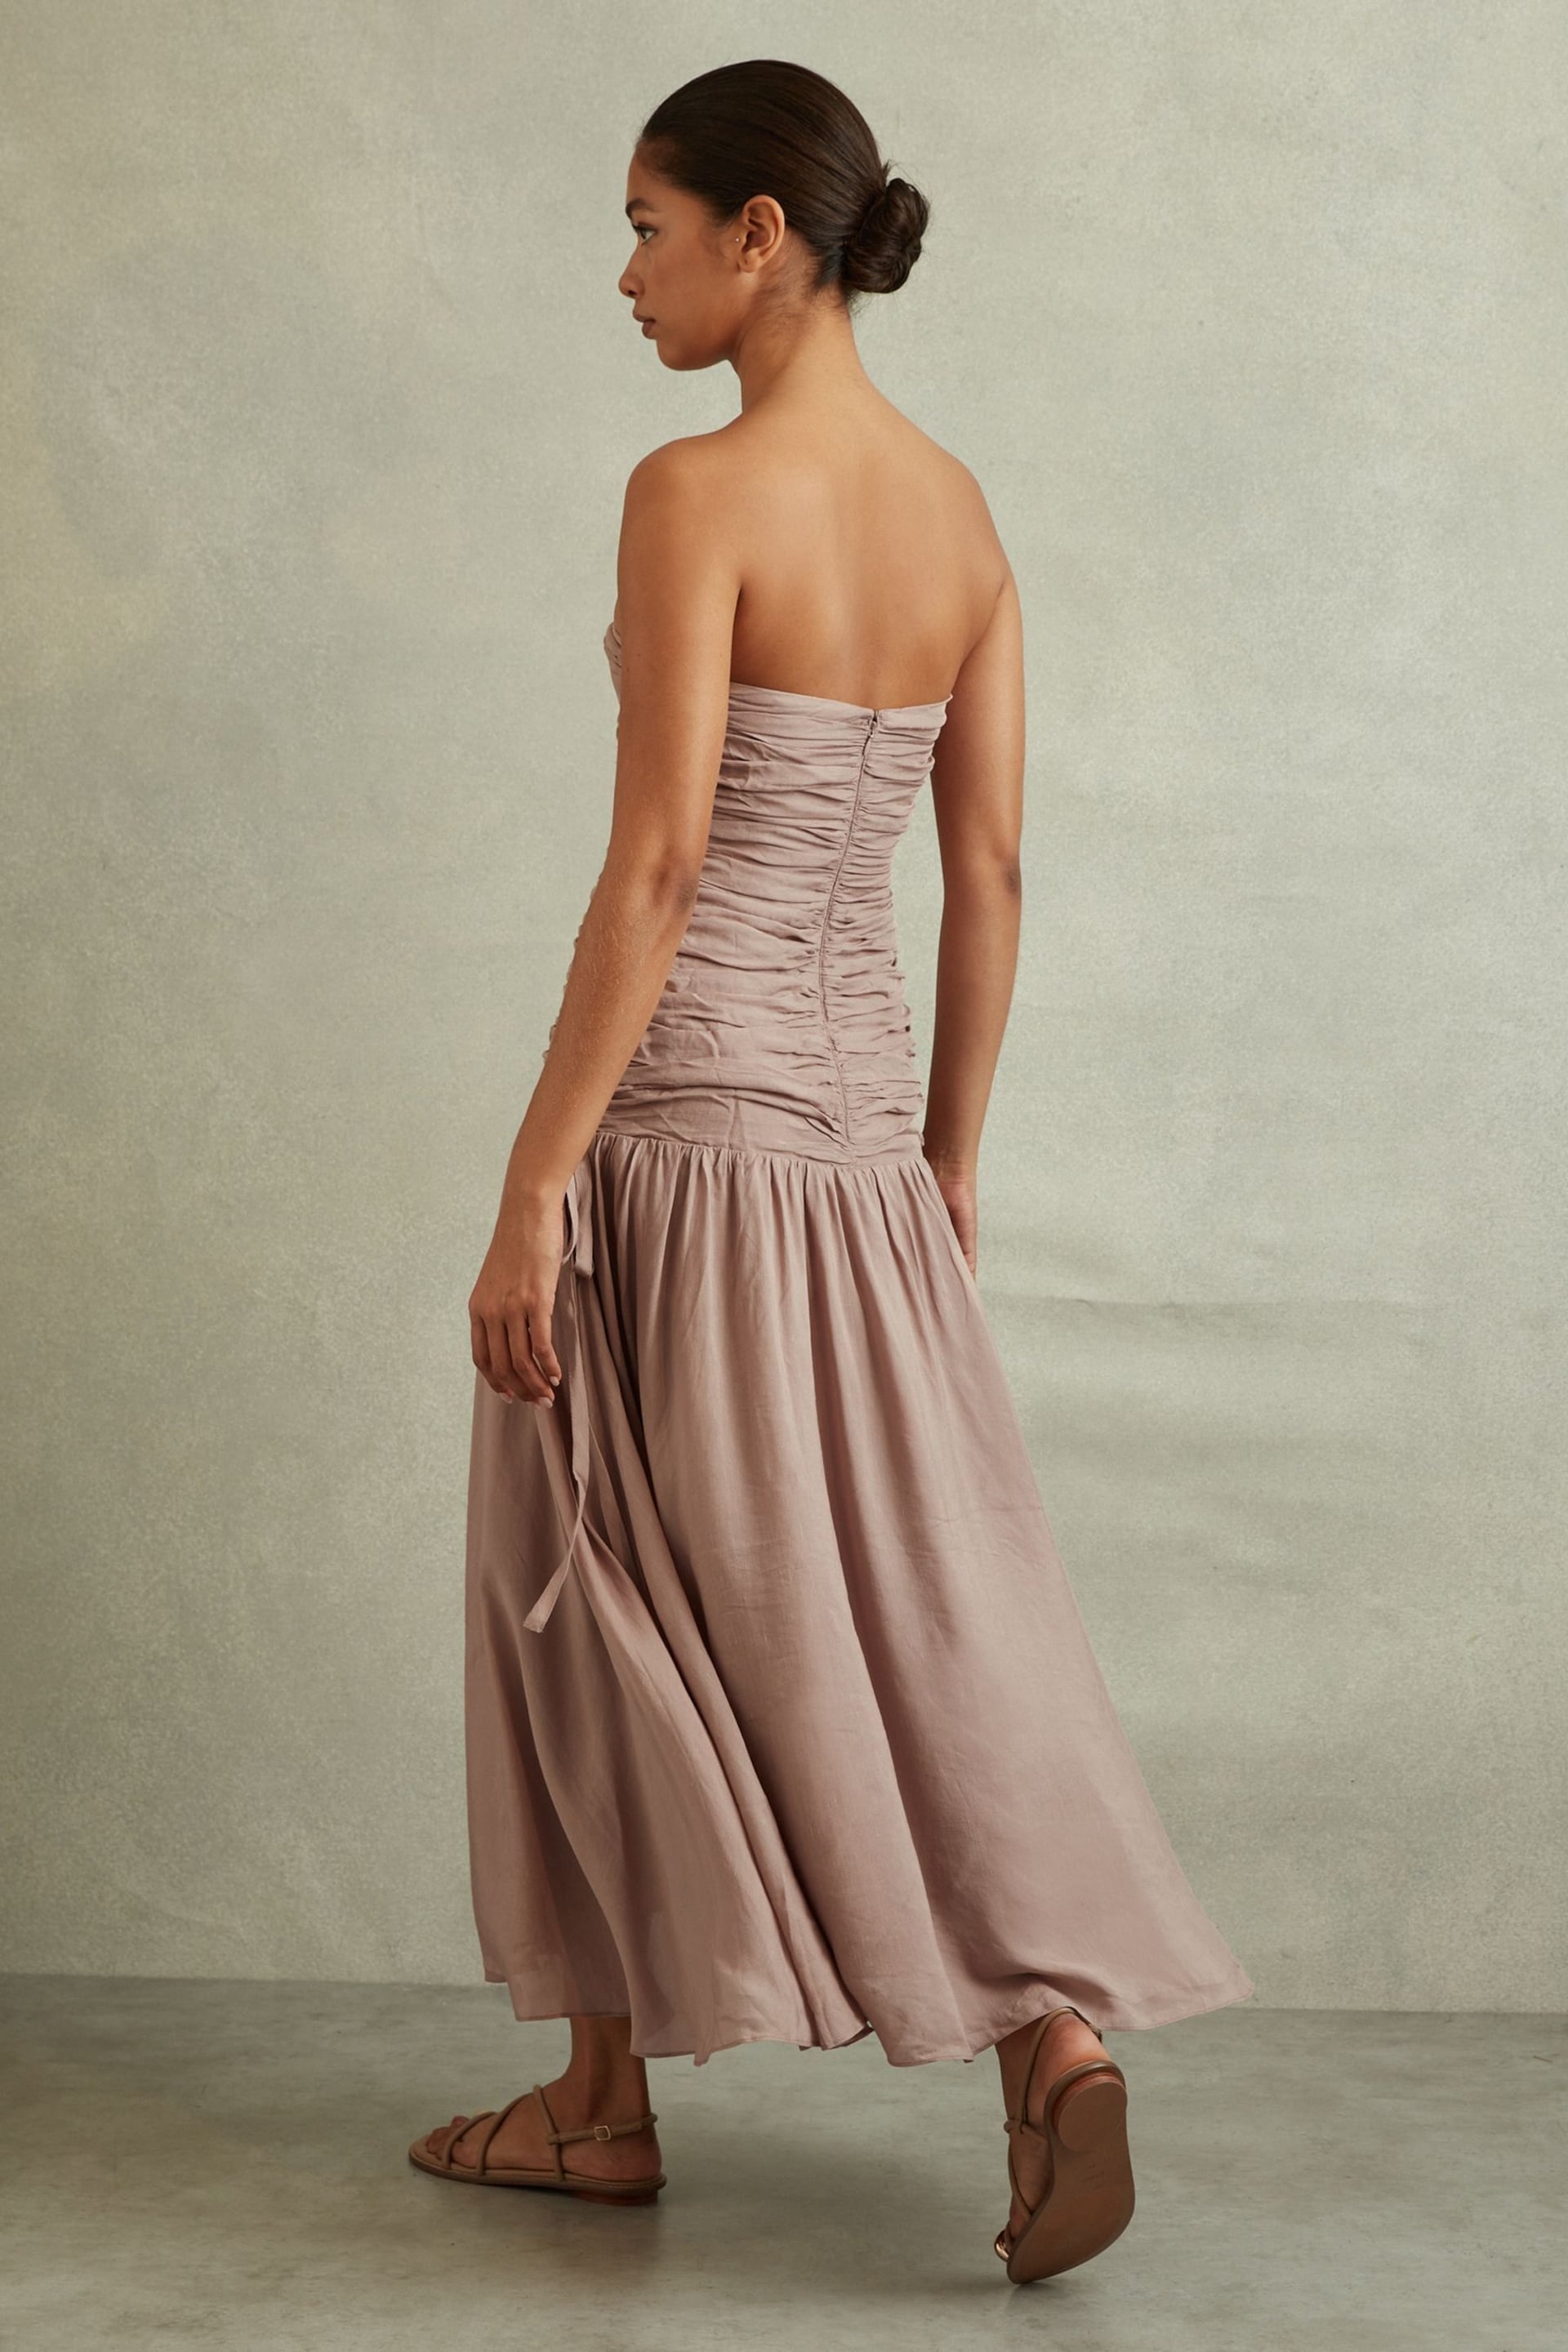 Reiss Dusty Pink Ryder Viscose Linen Ruched Maxi Dress - Image 4 of 6